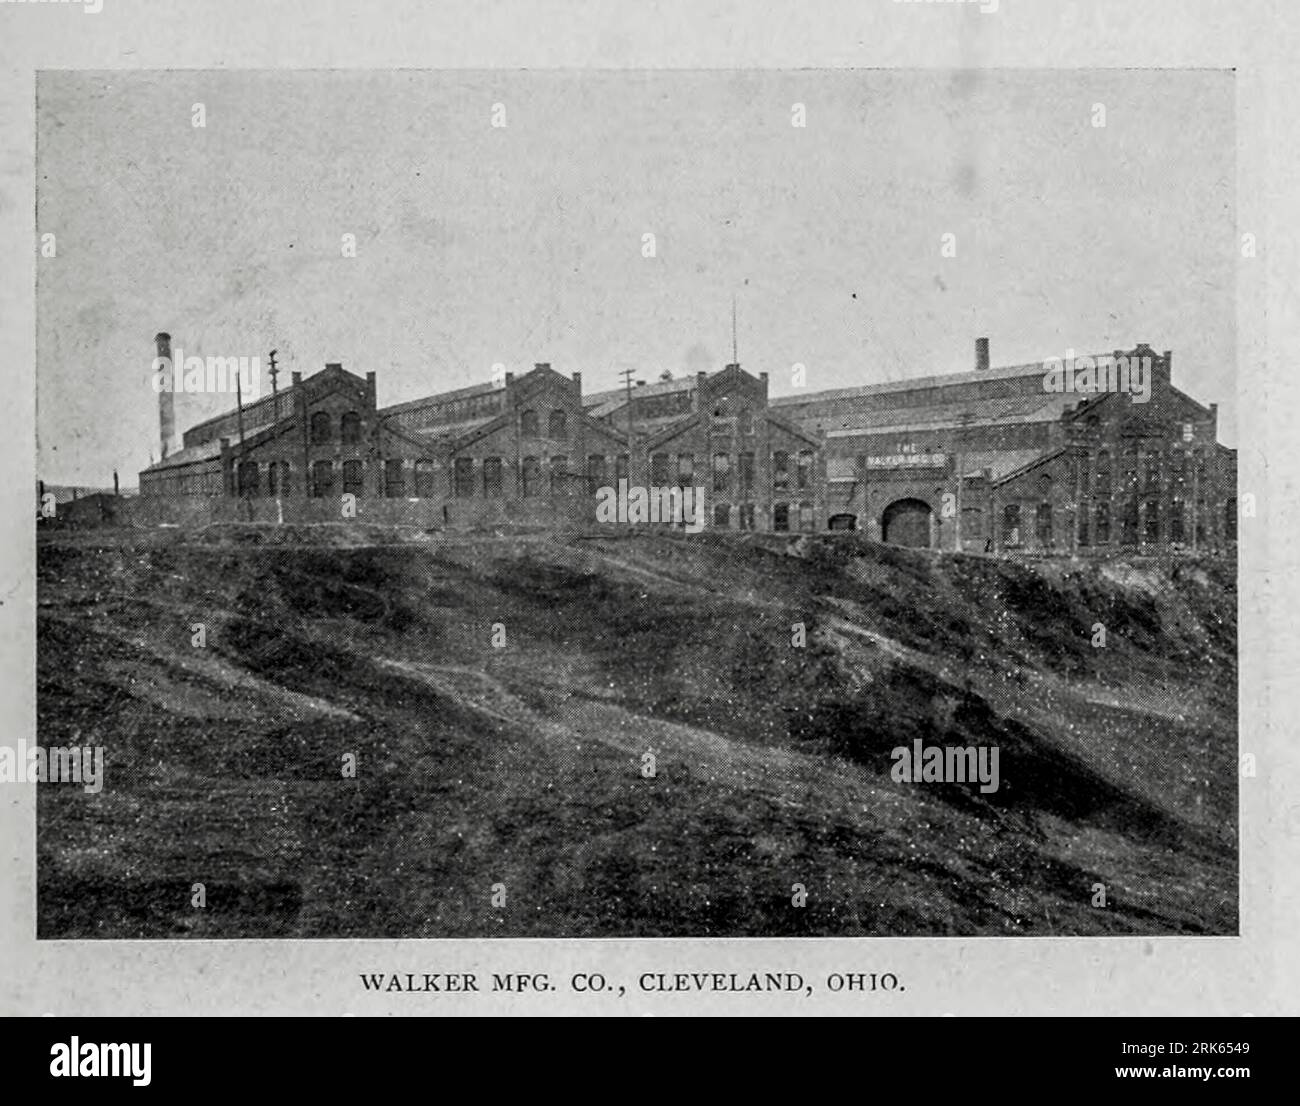 Wlaker Mfg. Co. Cleveland, Ohio from the Article MODERN MACHINE-SHOP ECONOMICS PRIME REQUISITES OF SHOP CONSTRUCTION By Horace L. Arnold from The Engineering Magazine DEVOTED TO INDUSTRIAL PROGRESS Volume XI October 1896 NEW YORK The Engineering Magazine Co Stock Photo